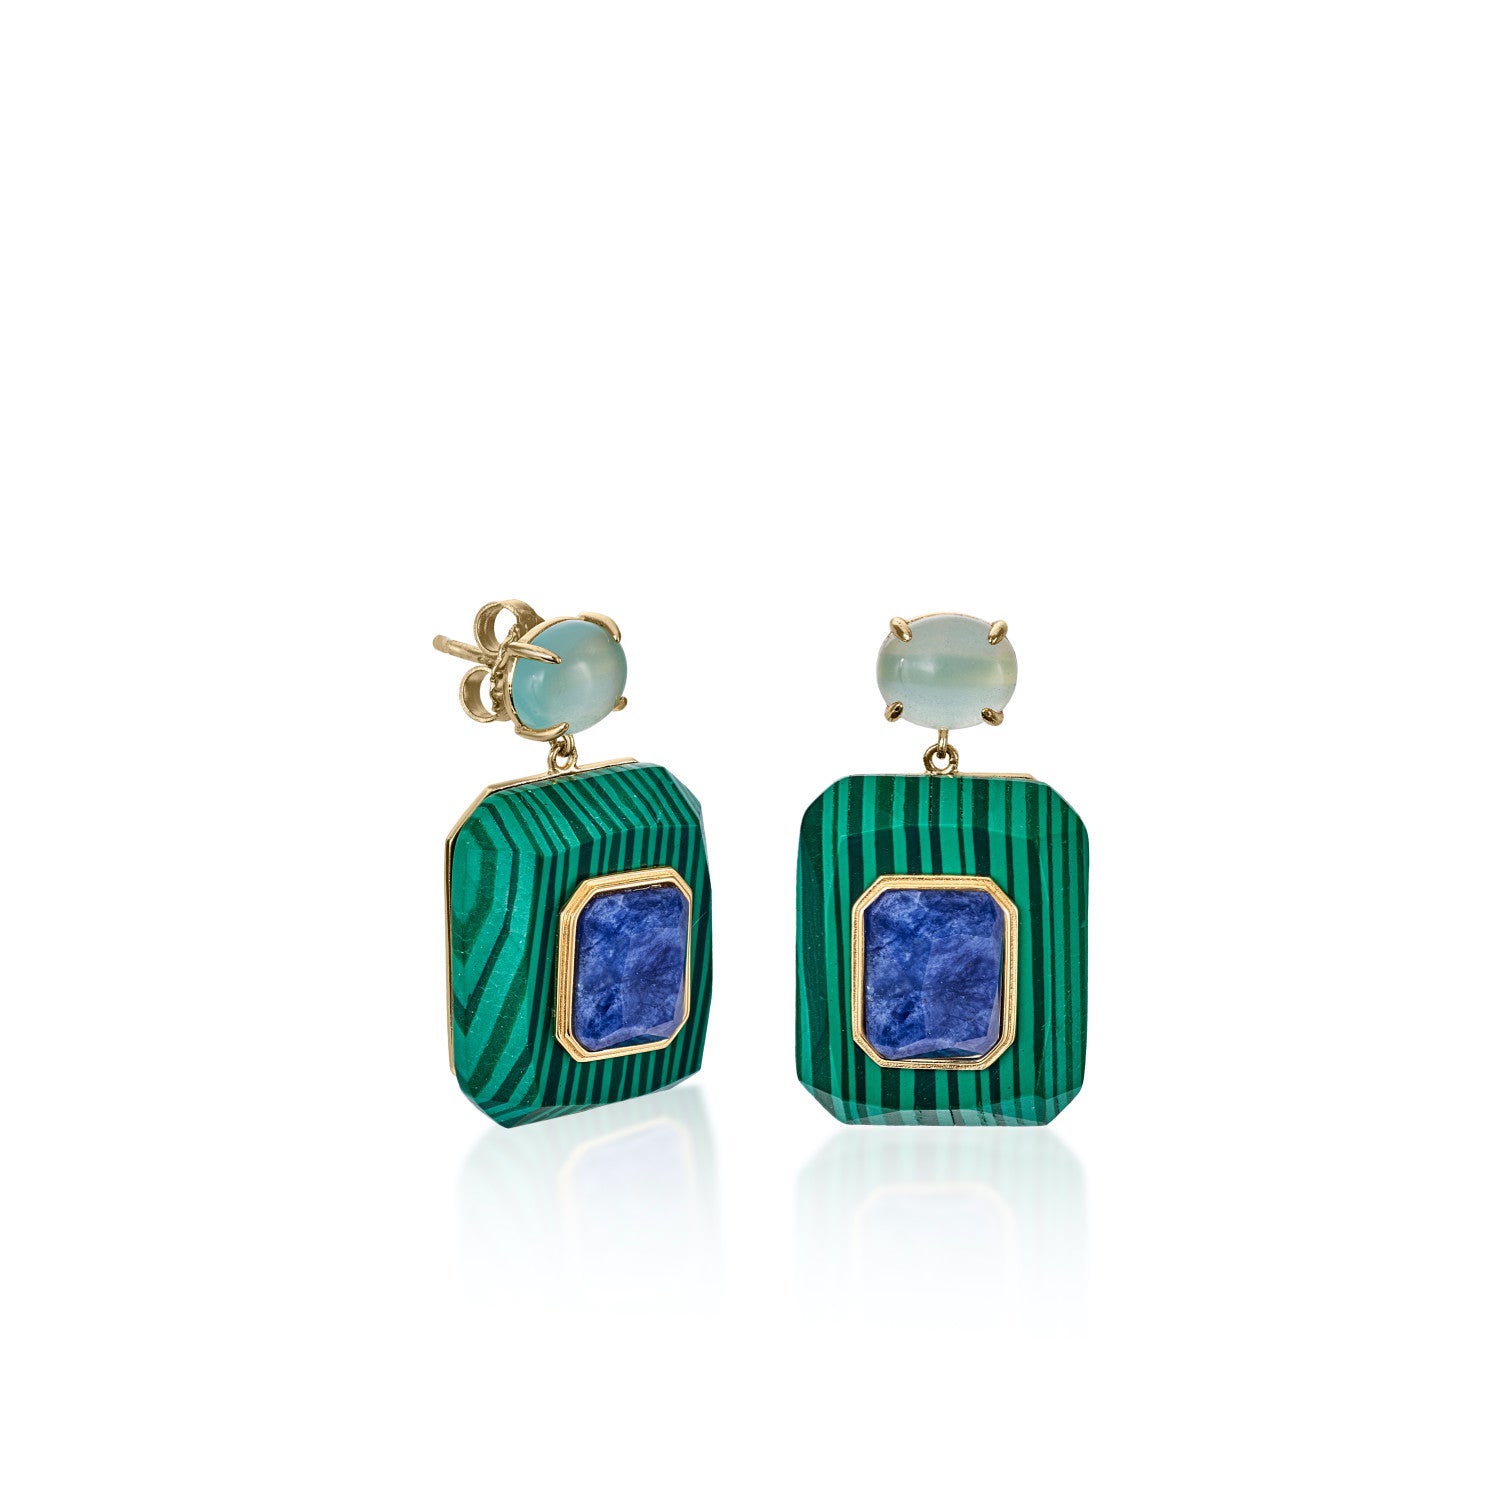 Natural stone with malachite and lapis lazuli earrings